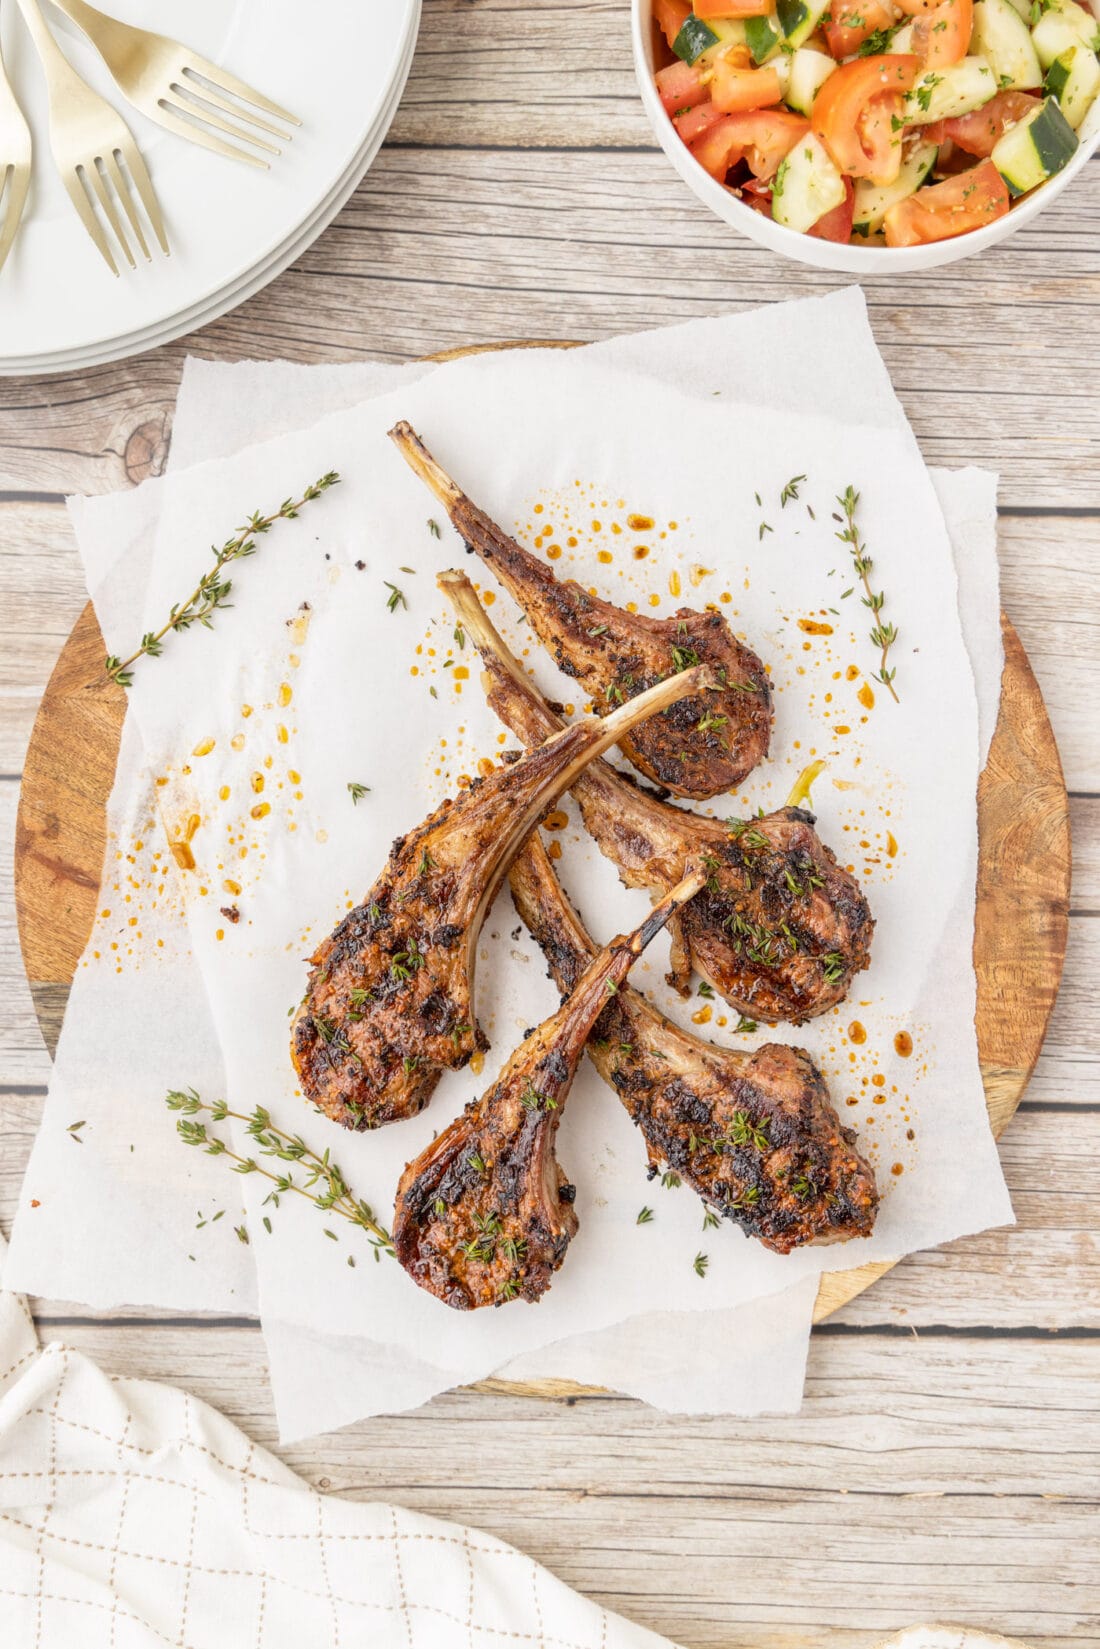 Grilled Lamb Chops on a wood board